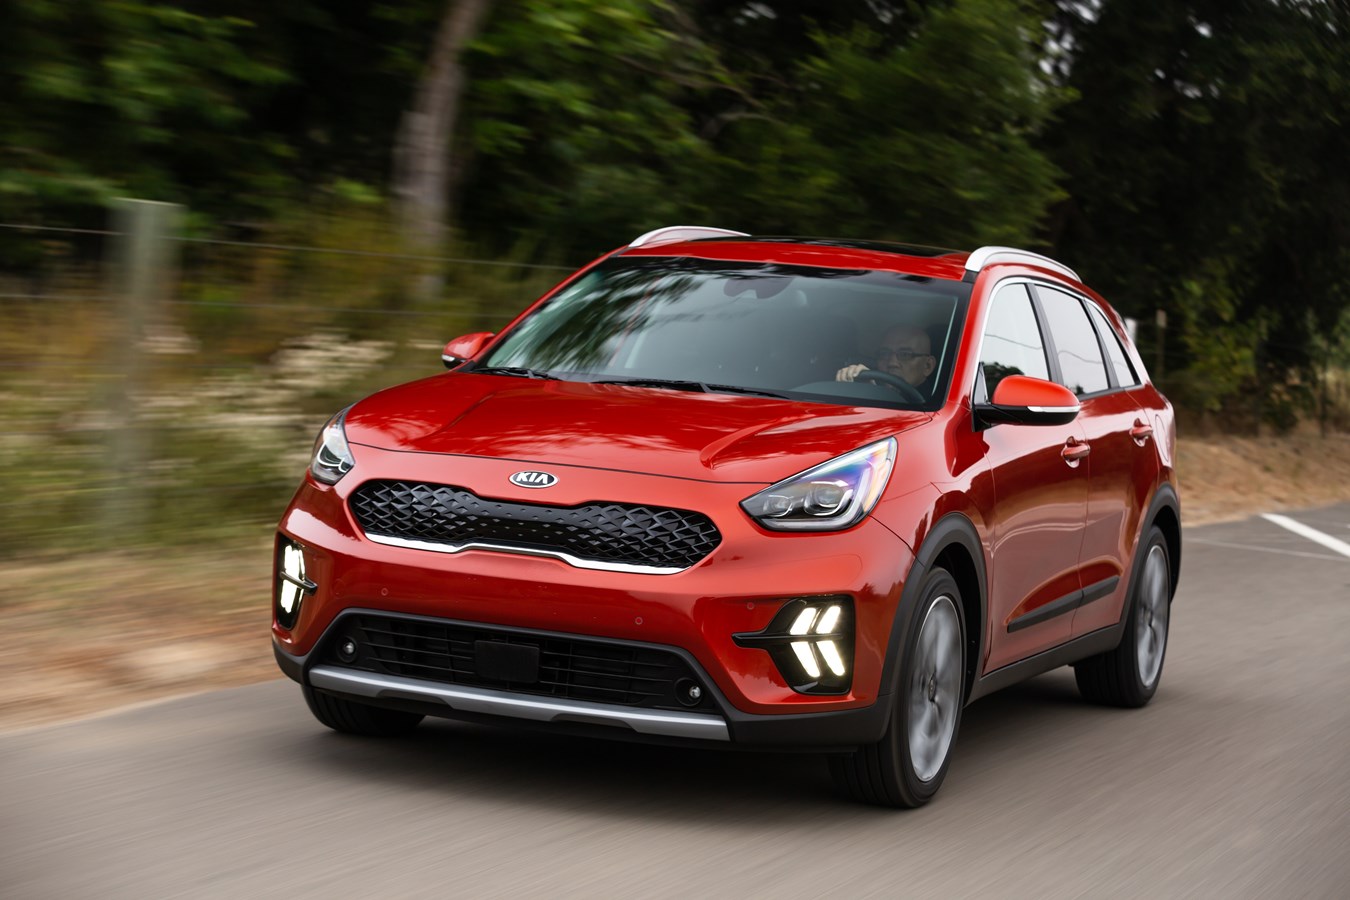 2020-kia-niro-hybrid-suv-promotional-video-and-vehicle-features